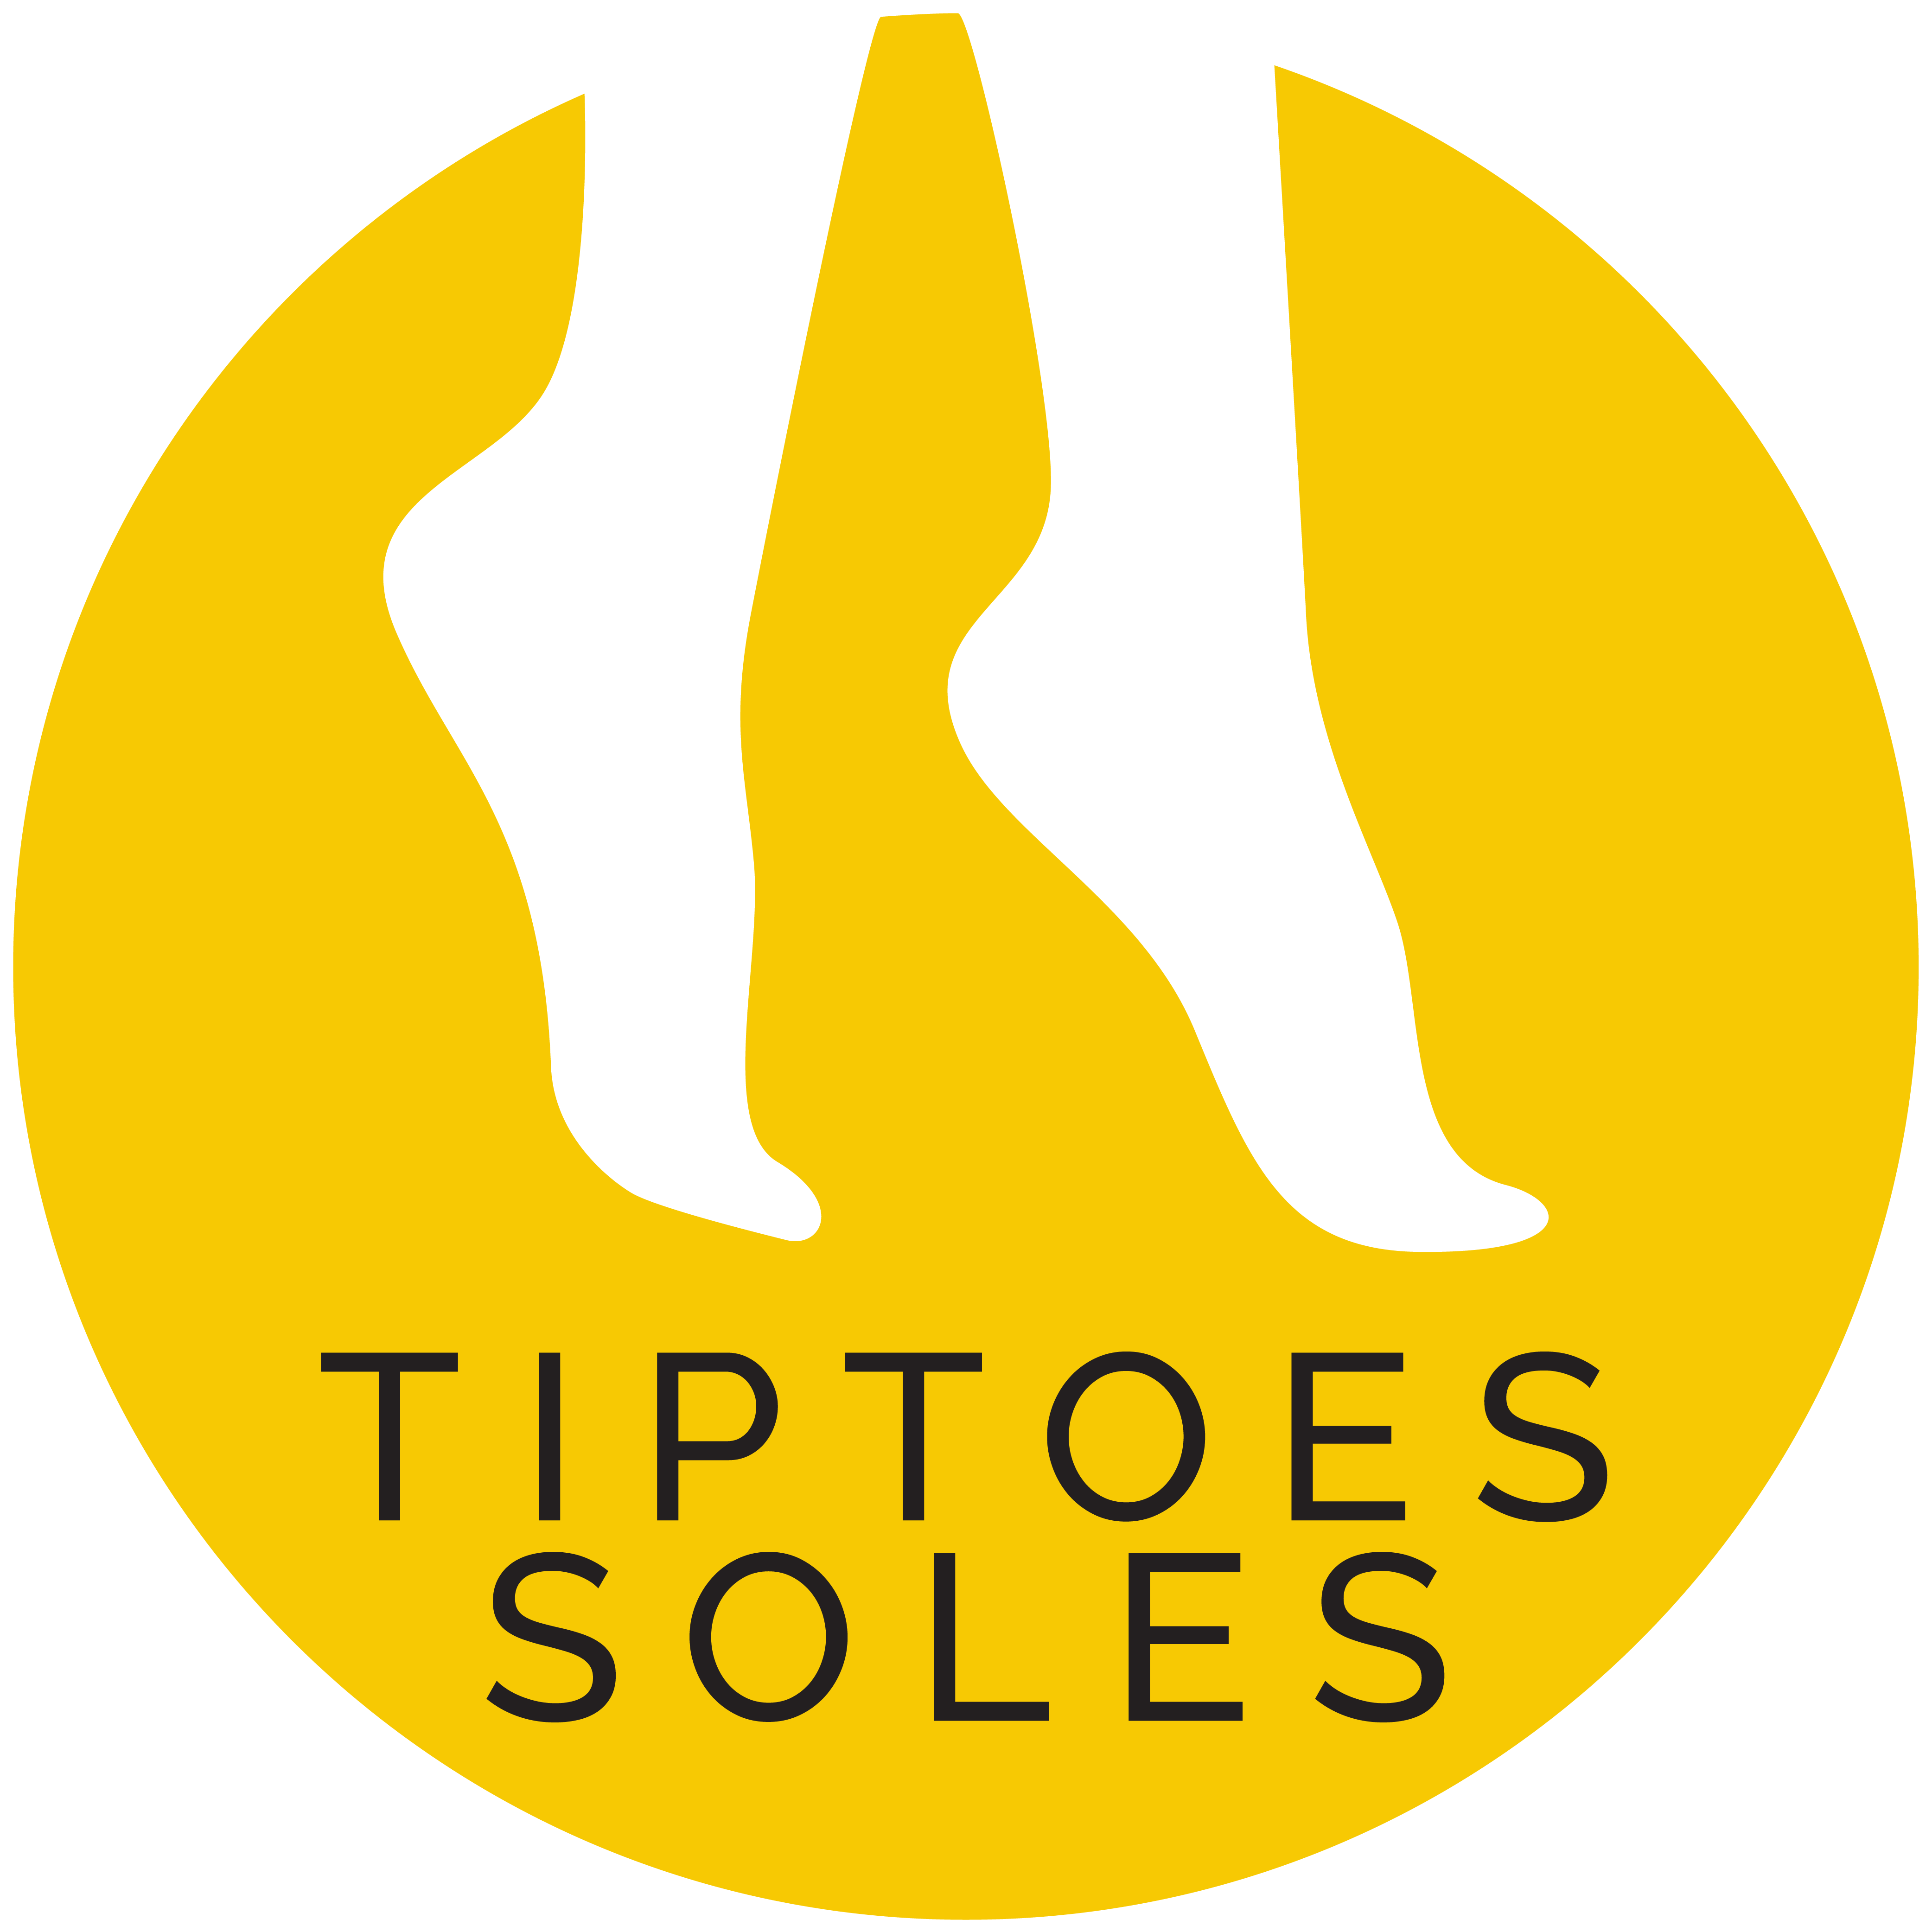 TipToe Soles Products